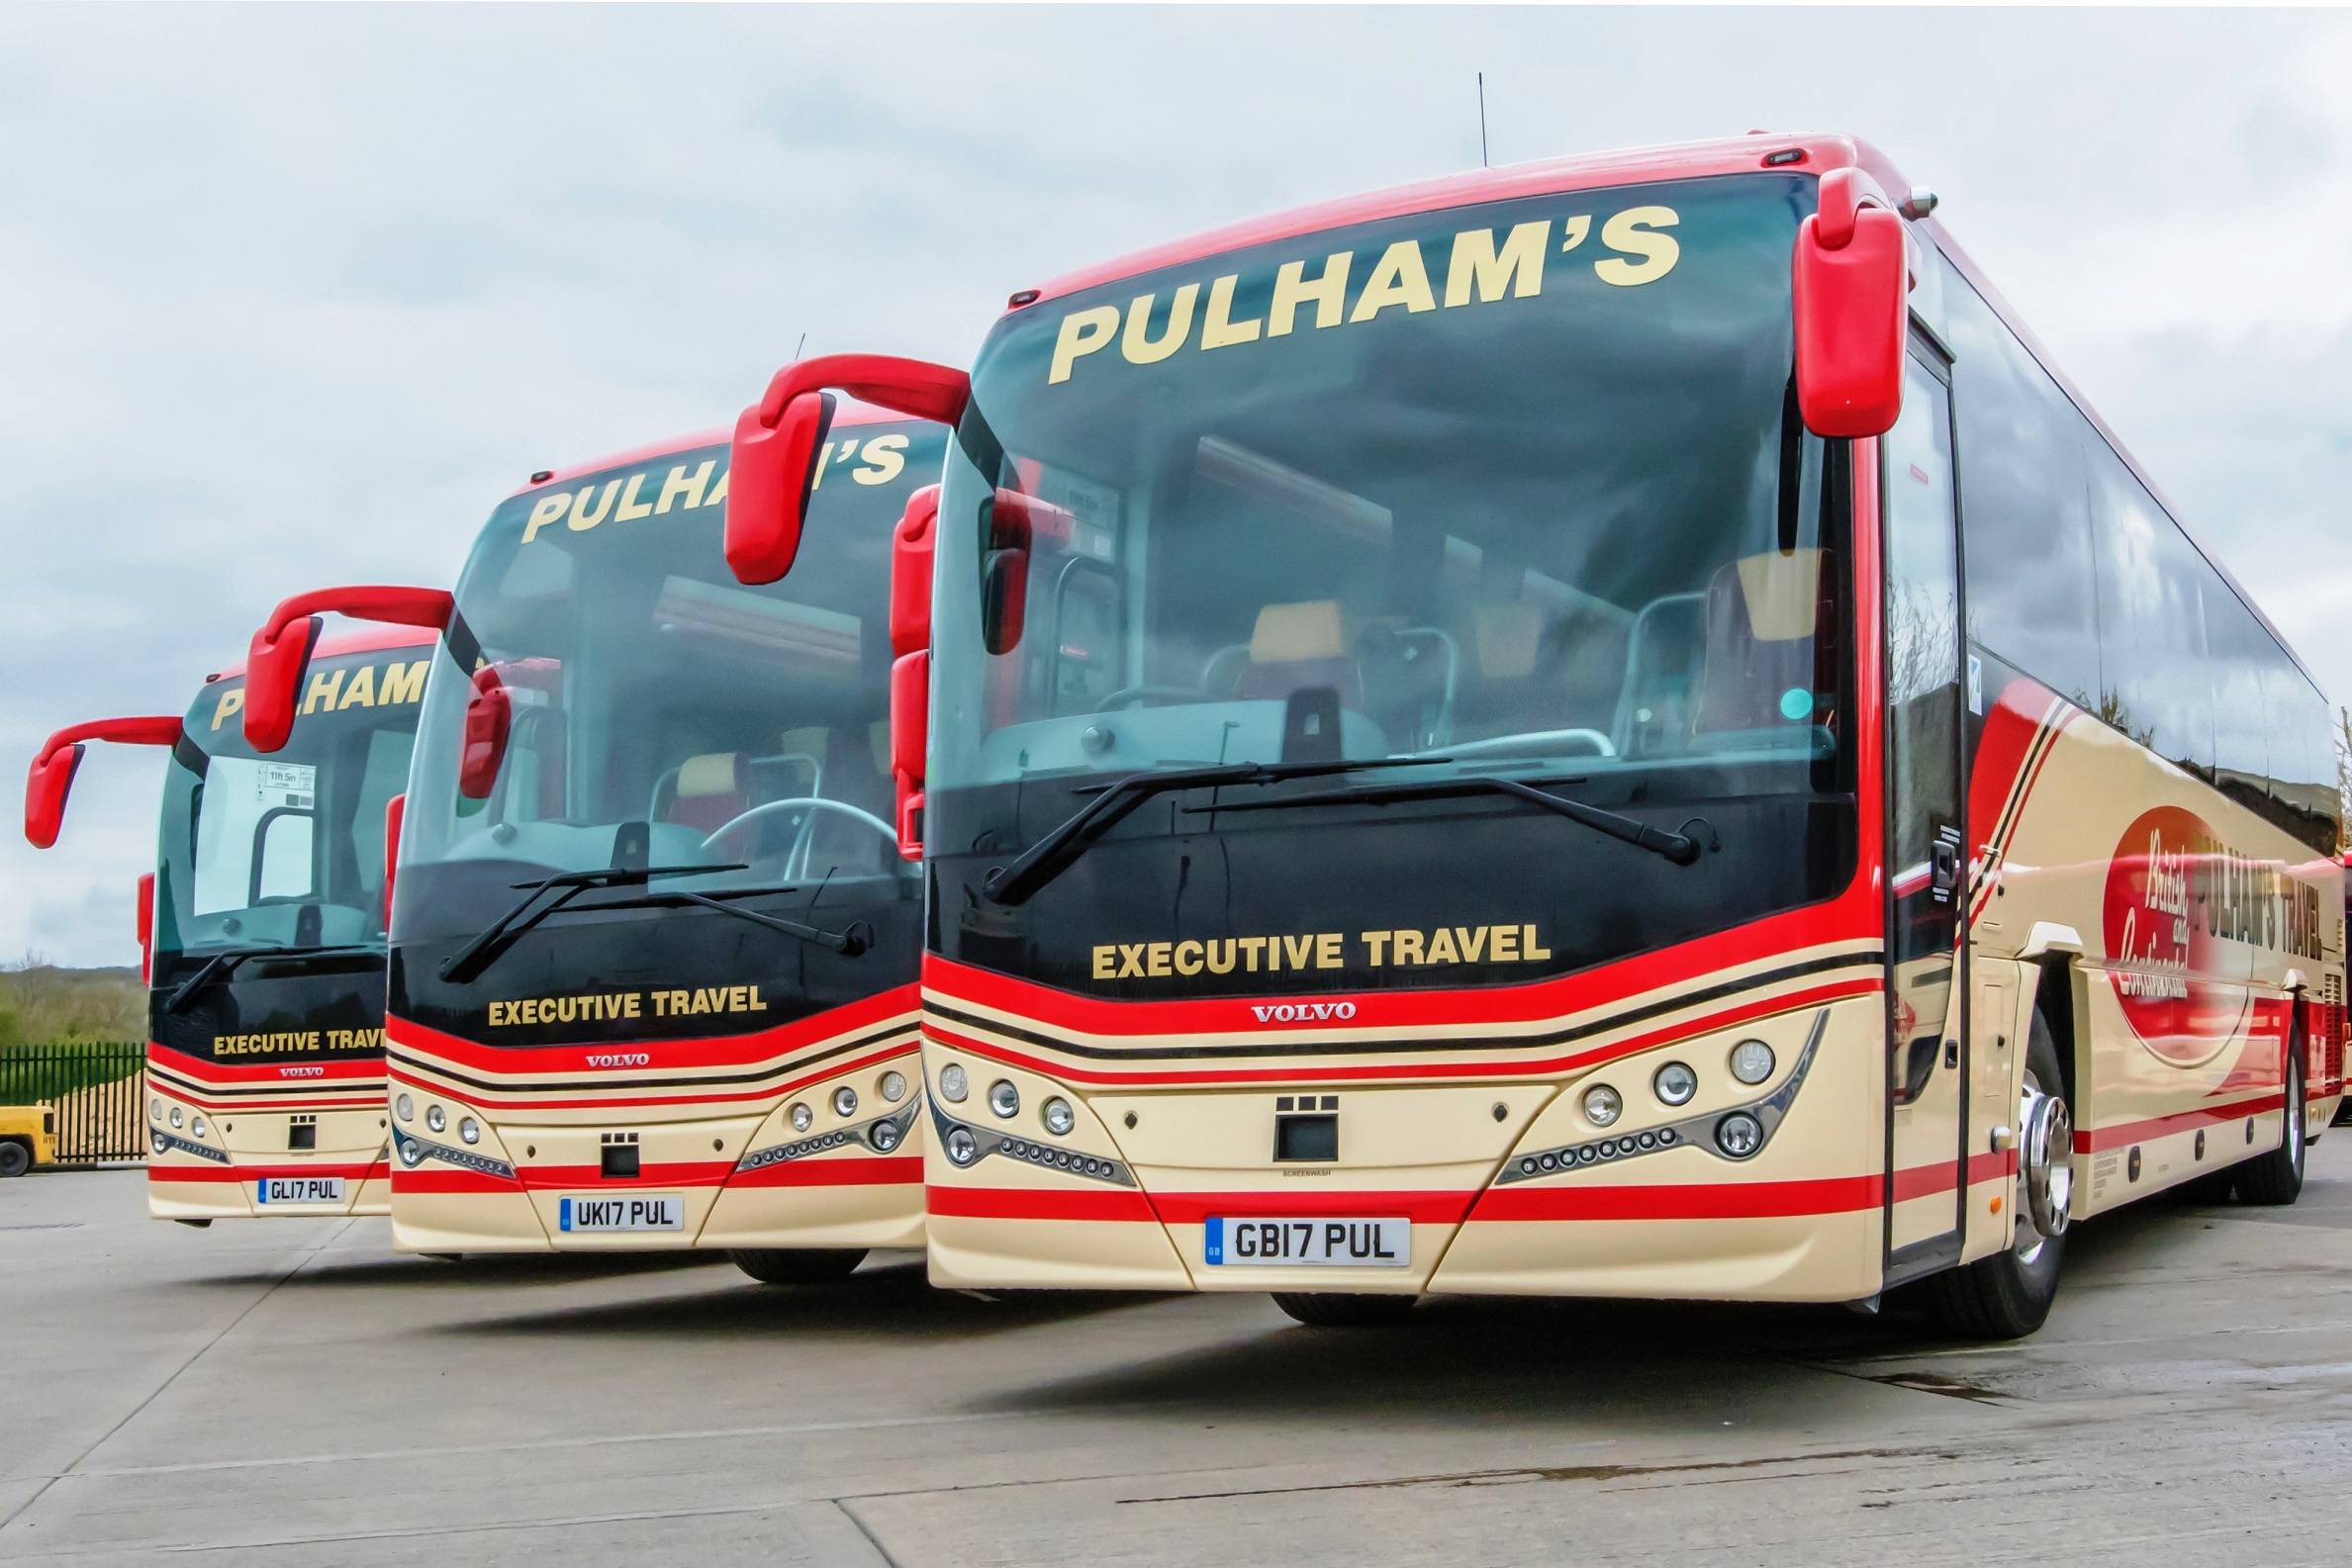 Pulhams Coaches is first to complete Earned Recognition and Guild of British Coach Operators combined audit